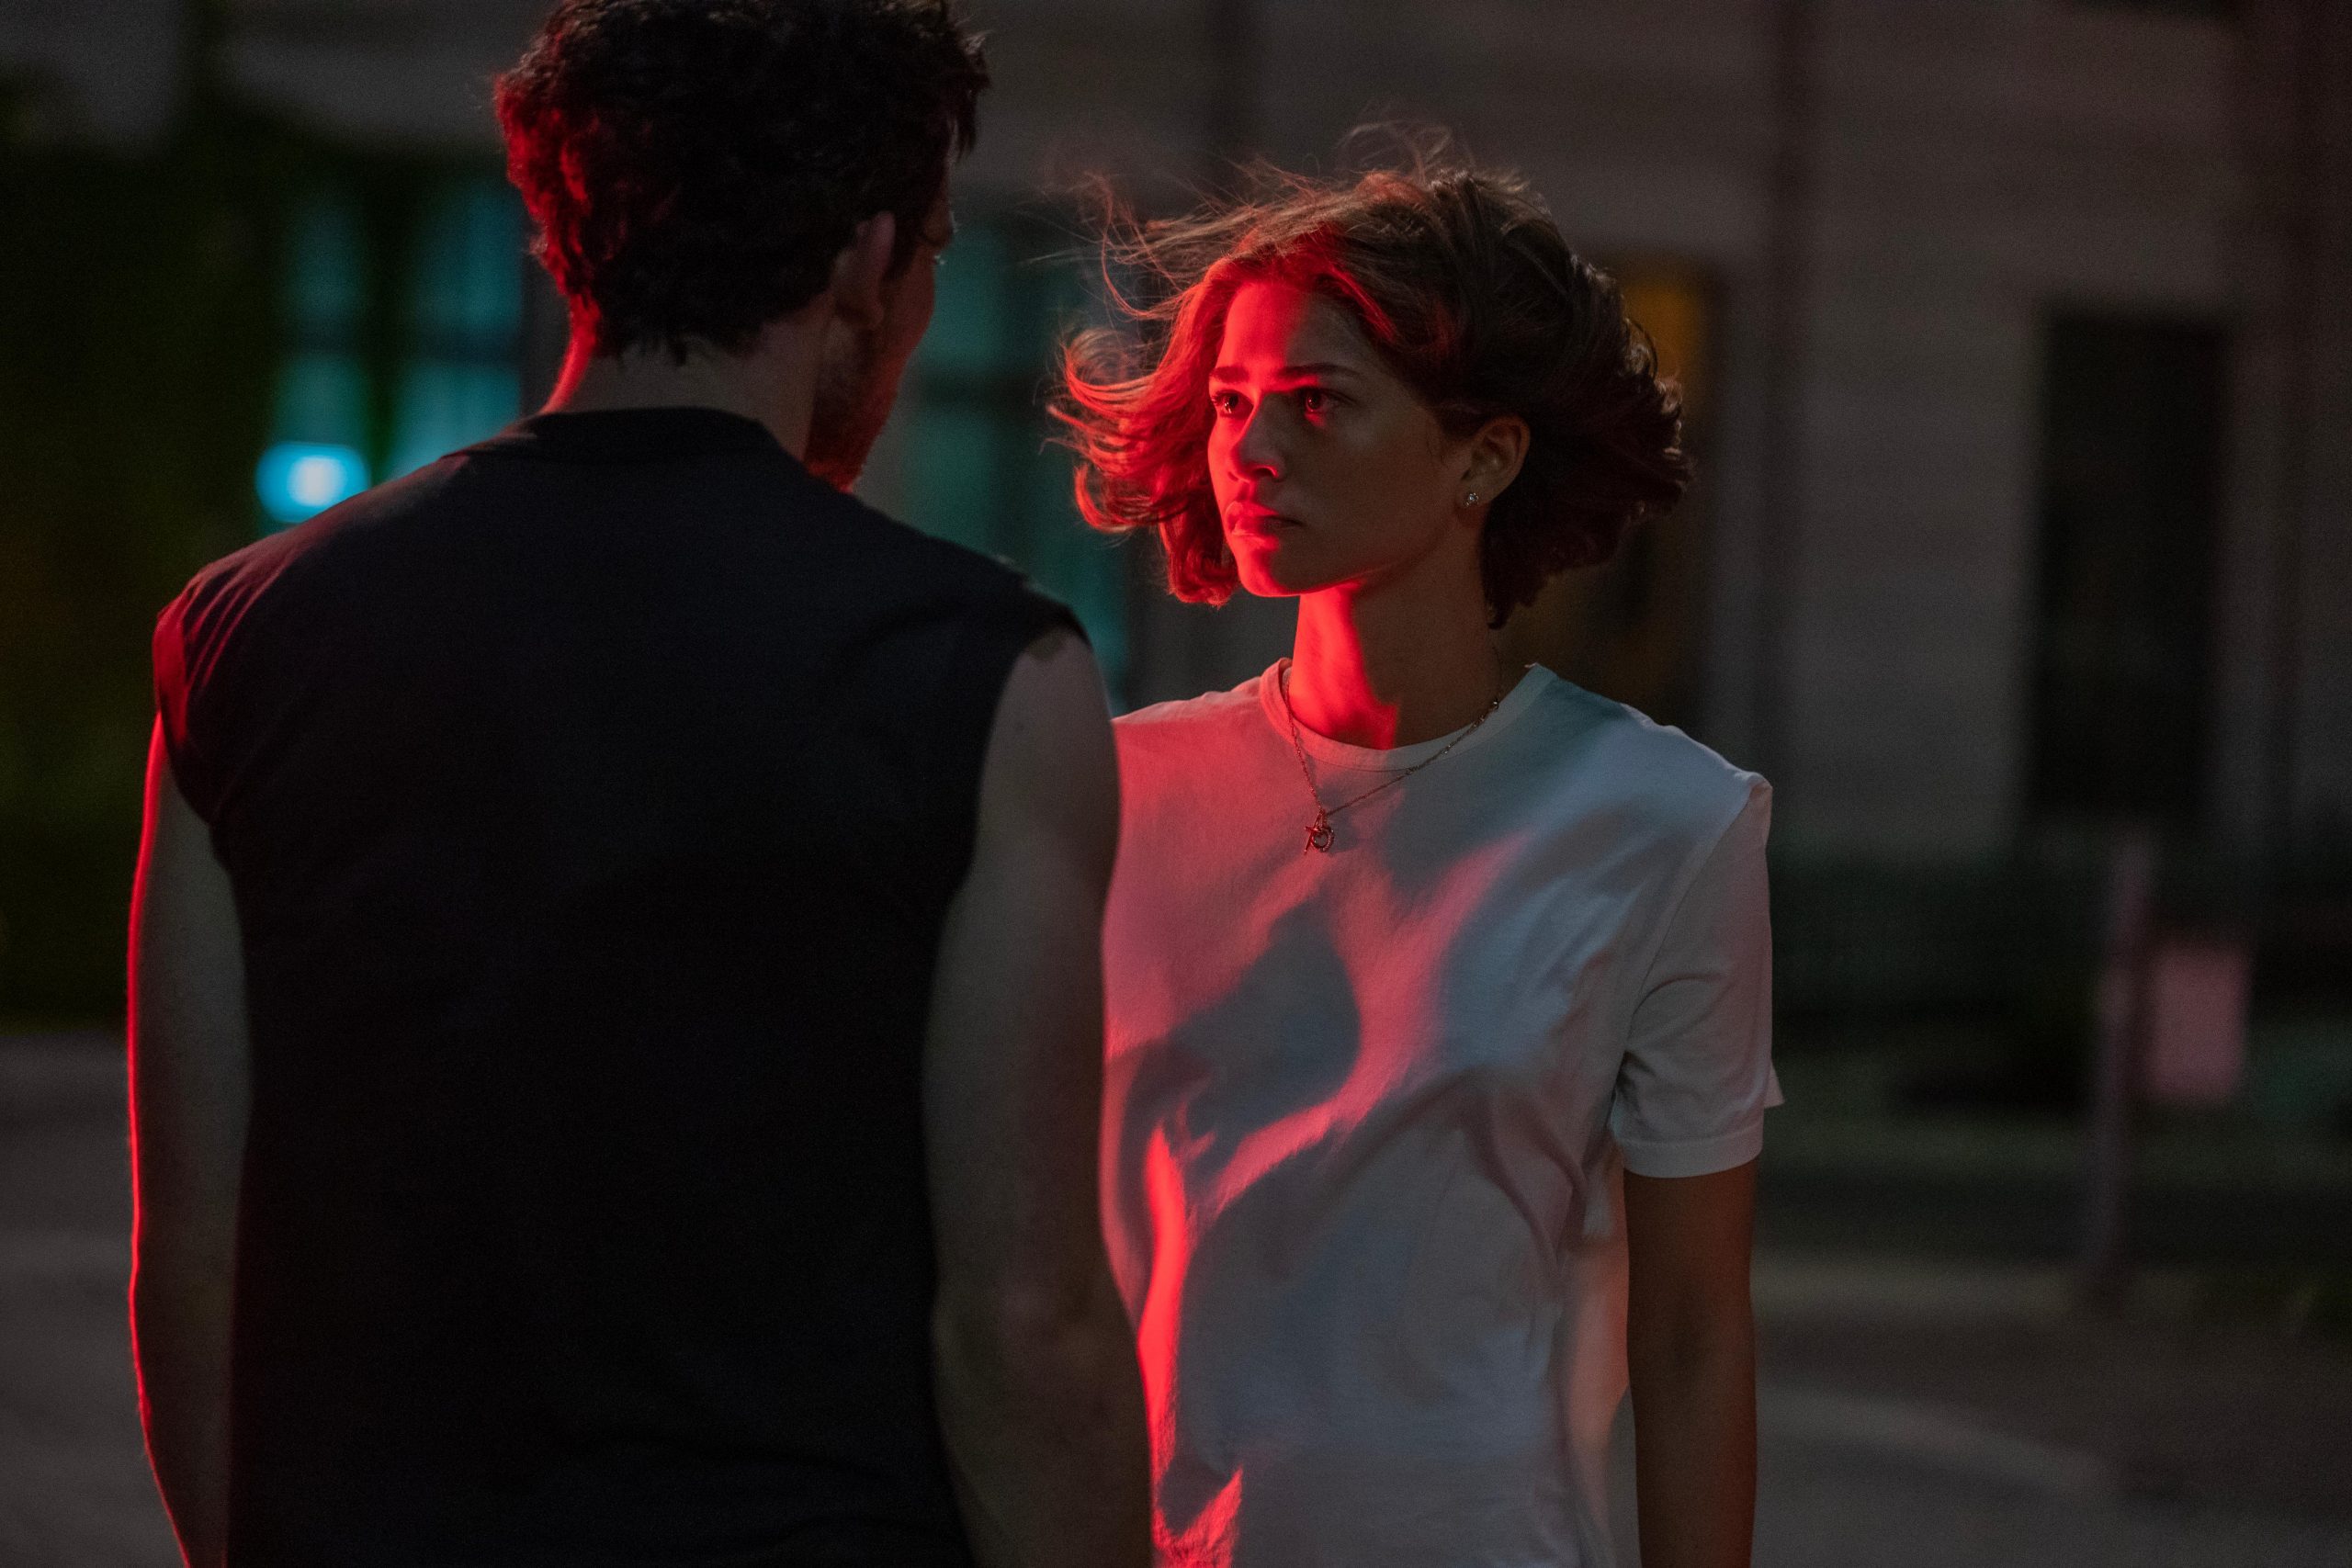 Dive into the Latest Trailer of Zendaya and Luca Guadagnino's Upcoming Tennis Drama